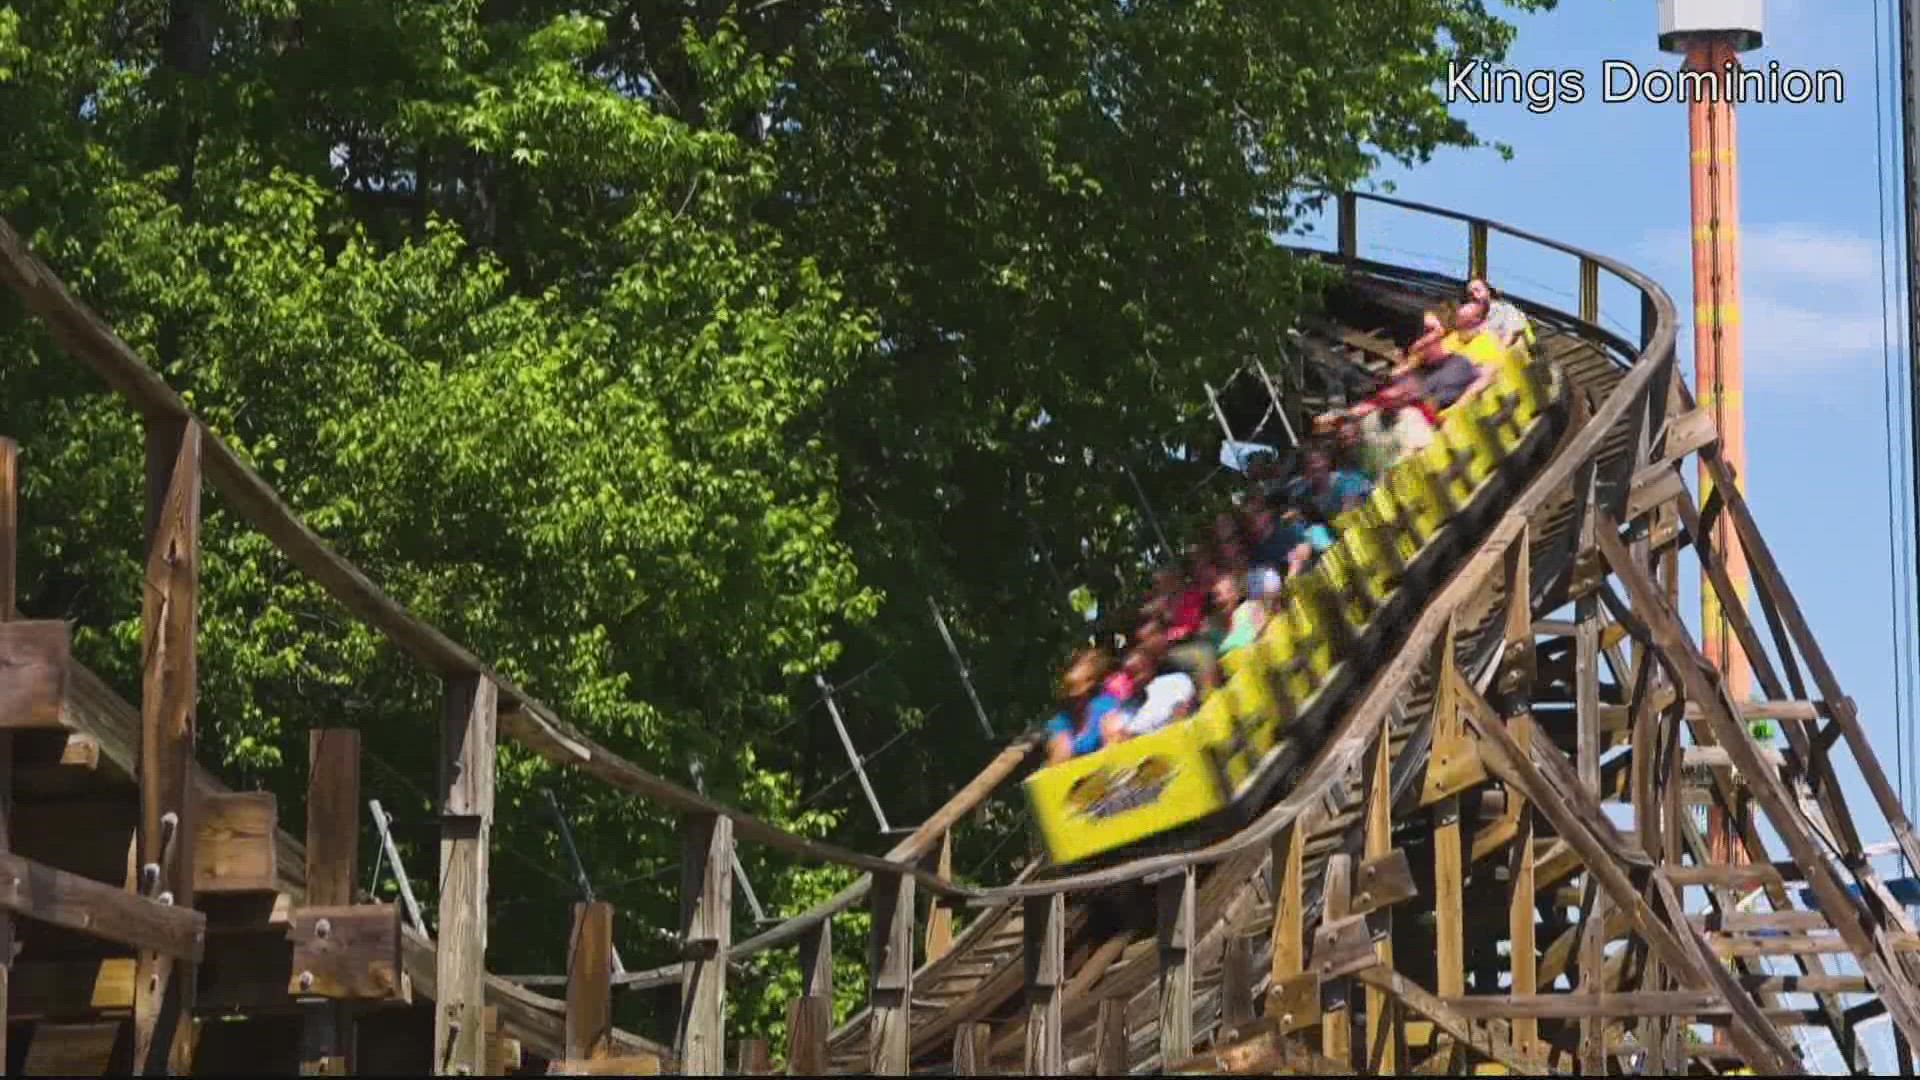 Kings Dominion, the popular 400-acre amusement park in Virginia, announced that the fun will not have to end as Labor Day approaches -- the park will expand to being